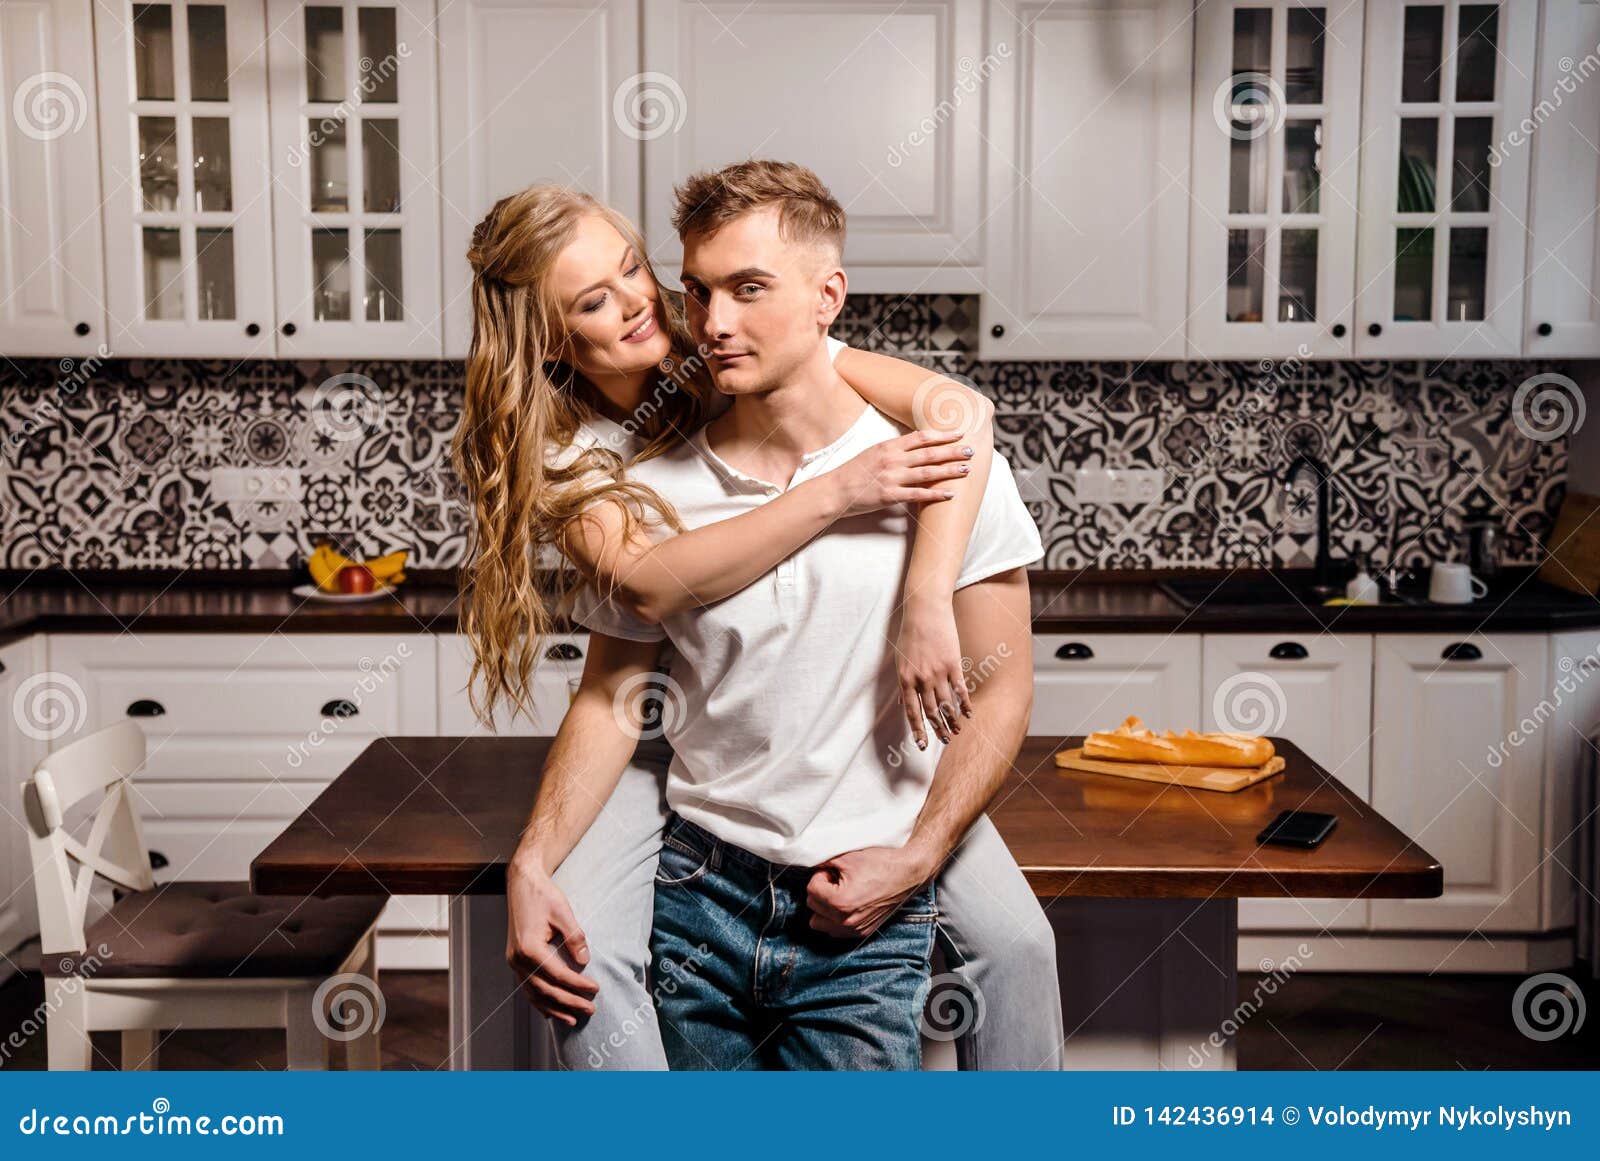 Lovely Couple at the Kitchen Stock Photo   Image of boyfriend ...